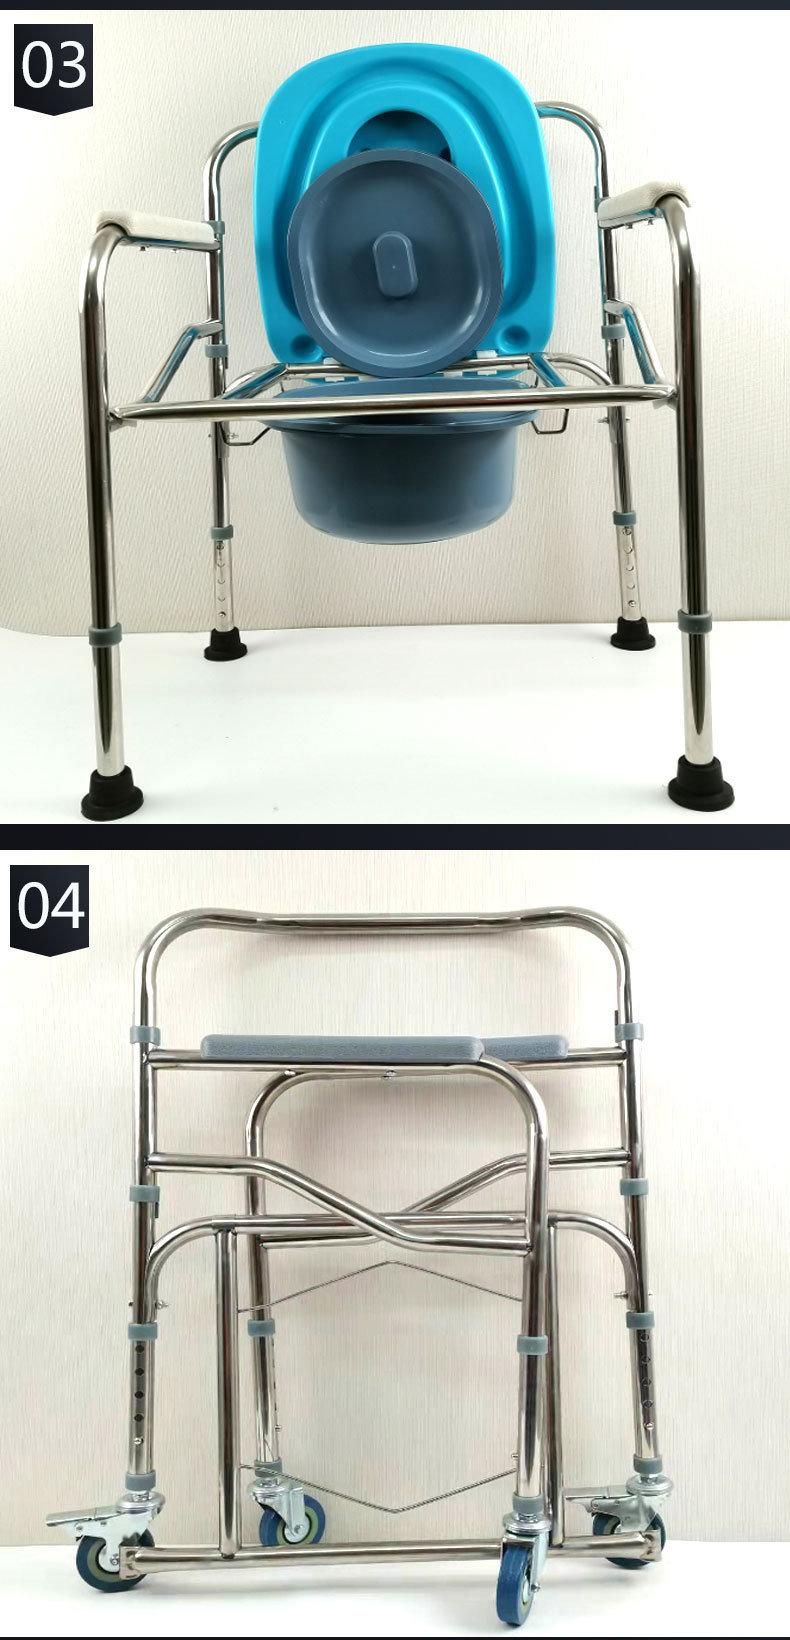 Chrome Parts for Disabled People Commode Chair with Good Price Bme 668